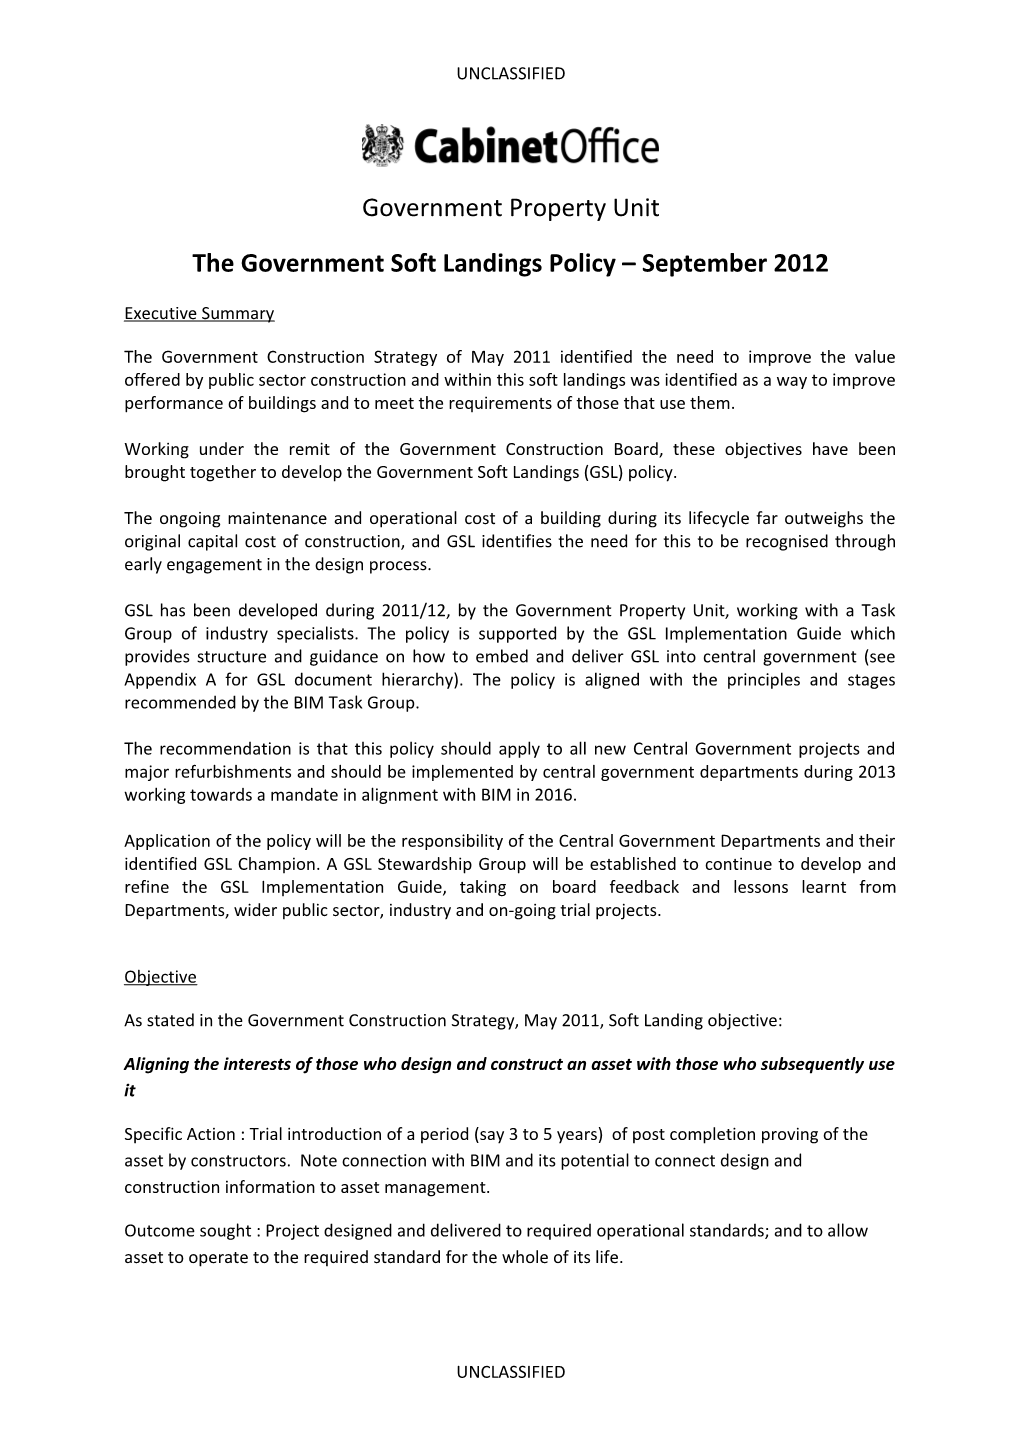 The Government Soft Landings Policy September 2012